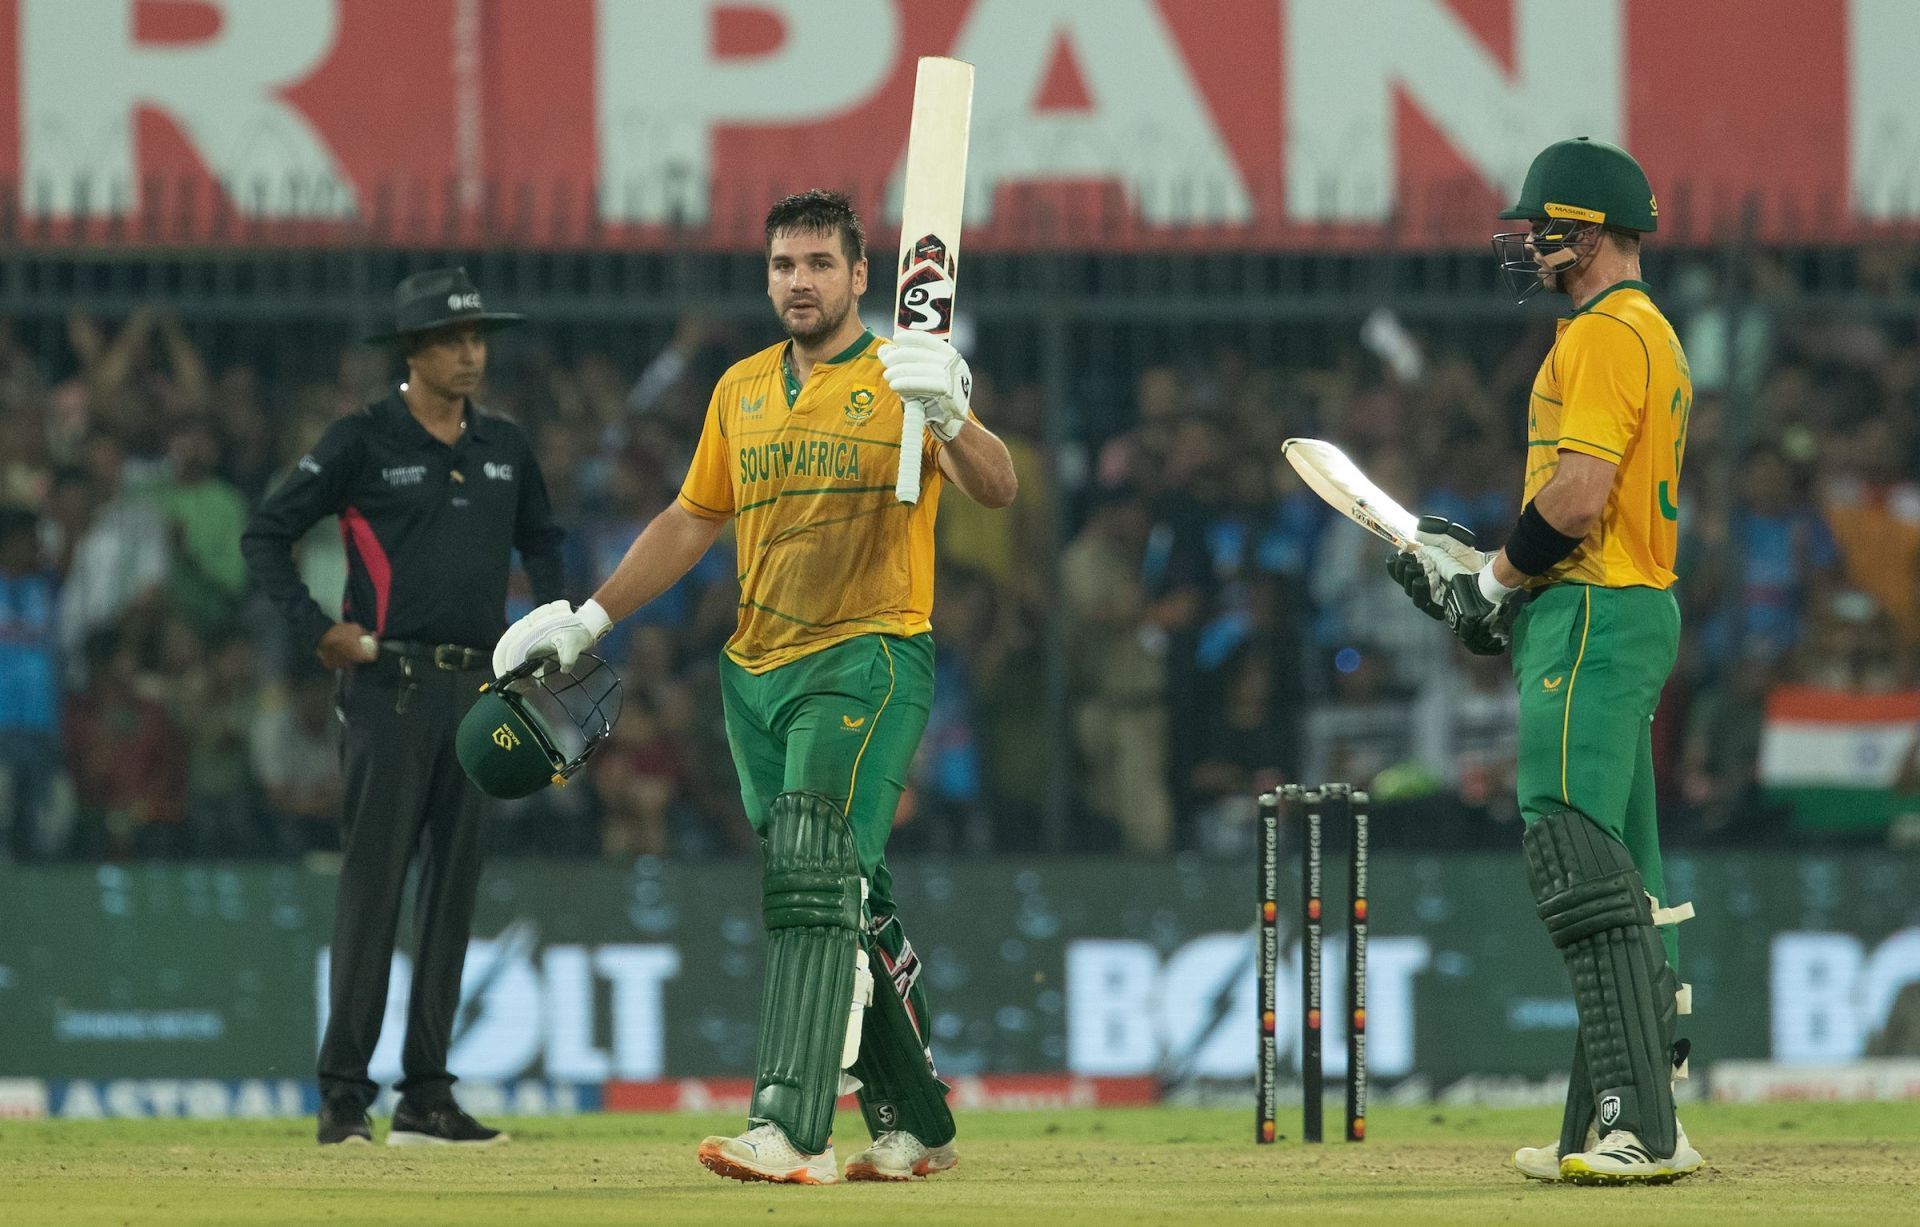 Rilee Rossouw raises his bat after reaching three figures for the first time in a T20I. (Credits: Twitter)